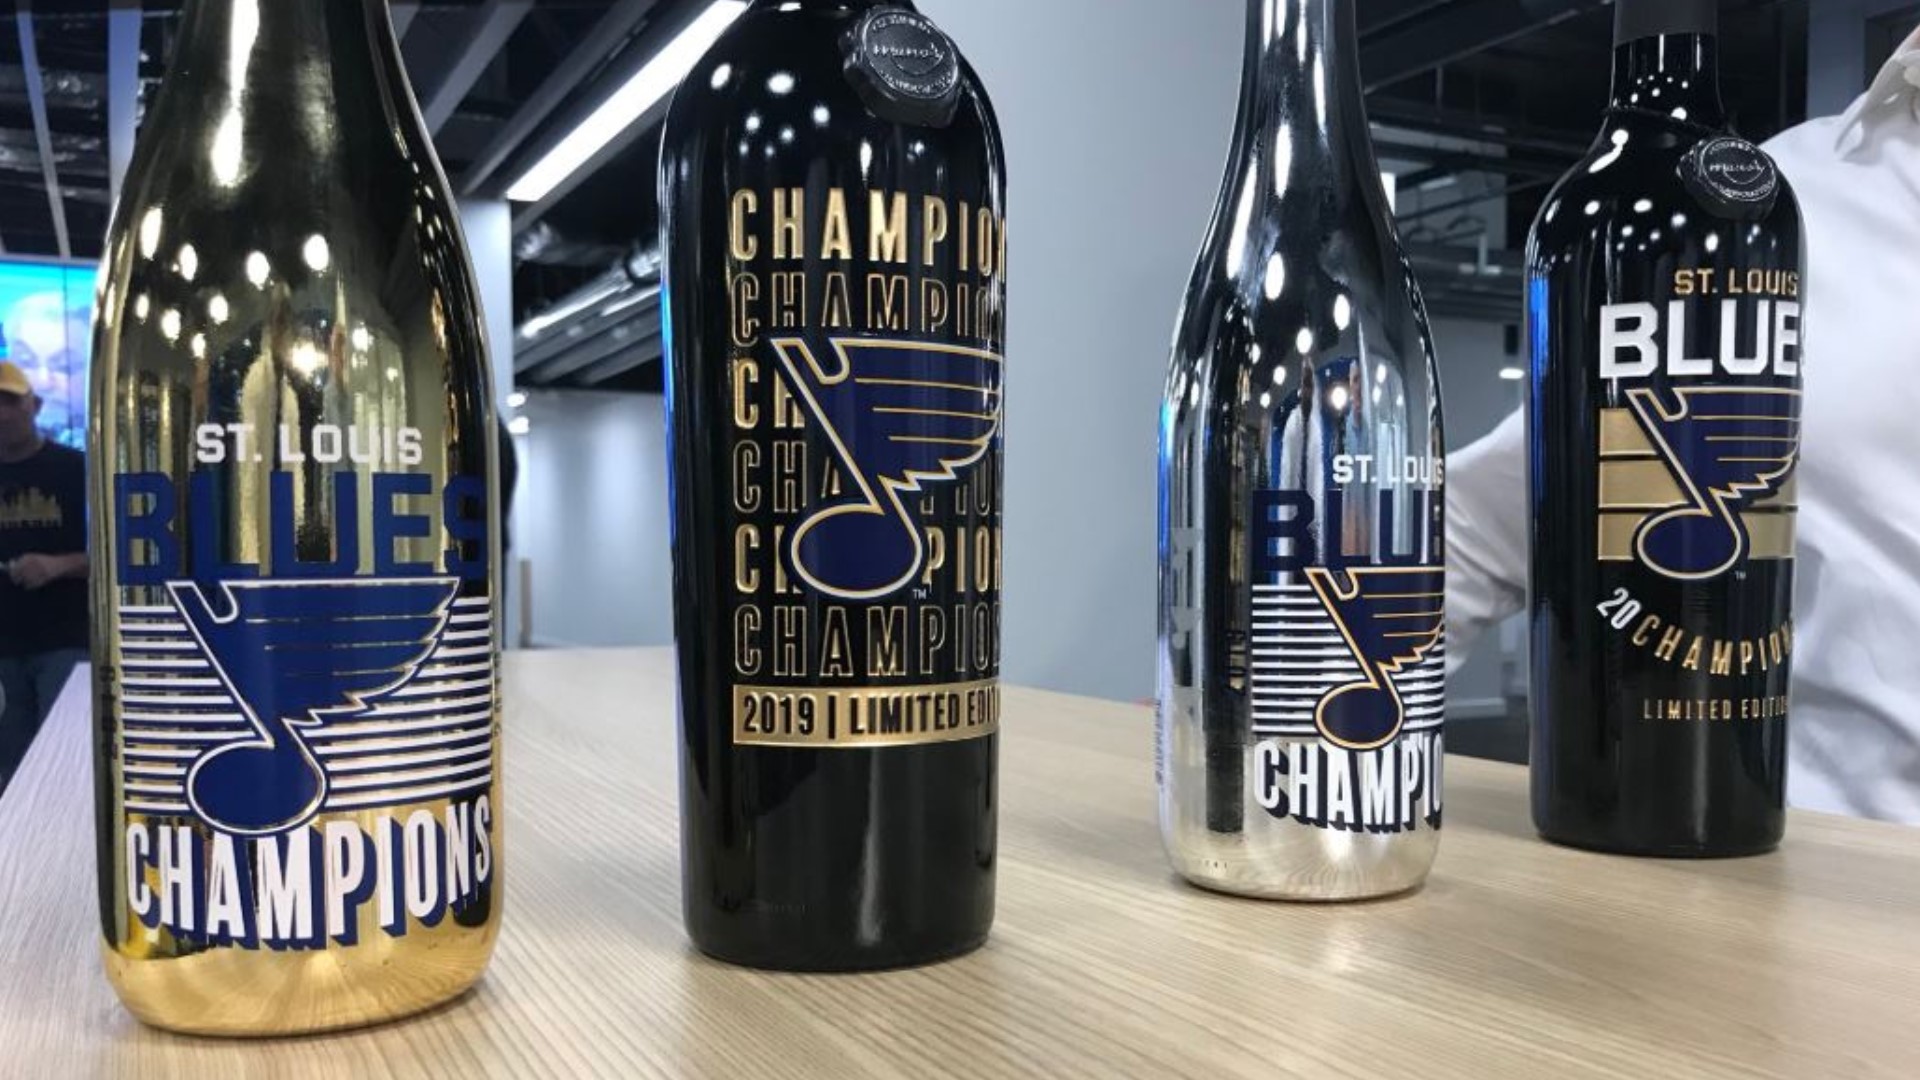 Celebrate the Blues' Stanley Cup Championship with some limited-edition commemorative wine.